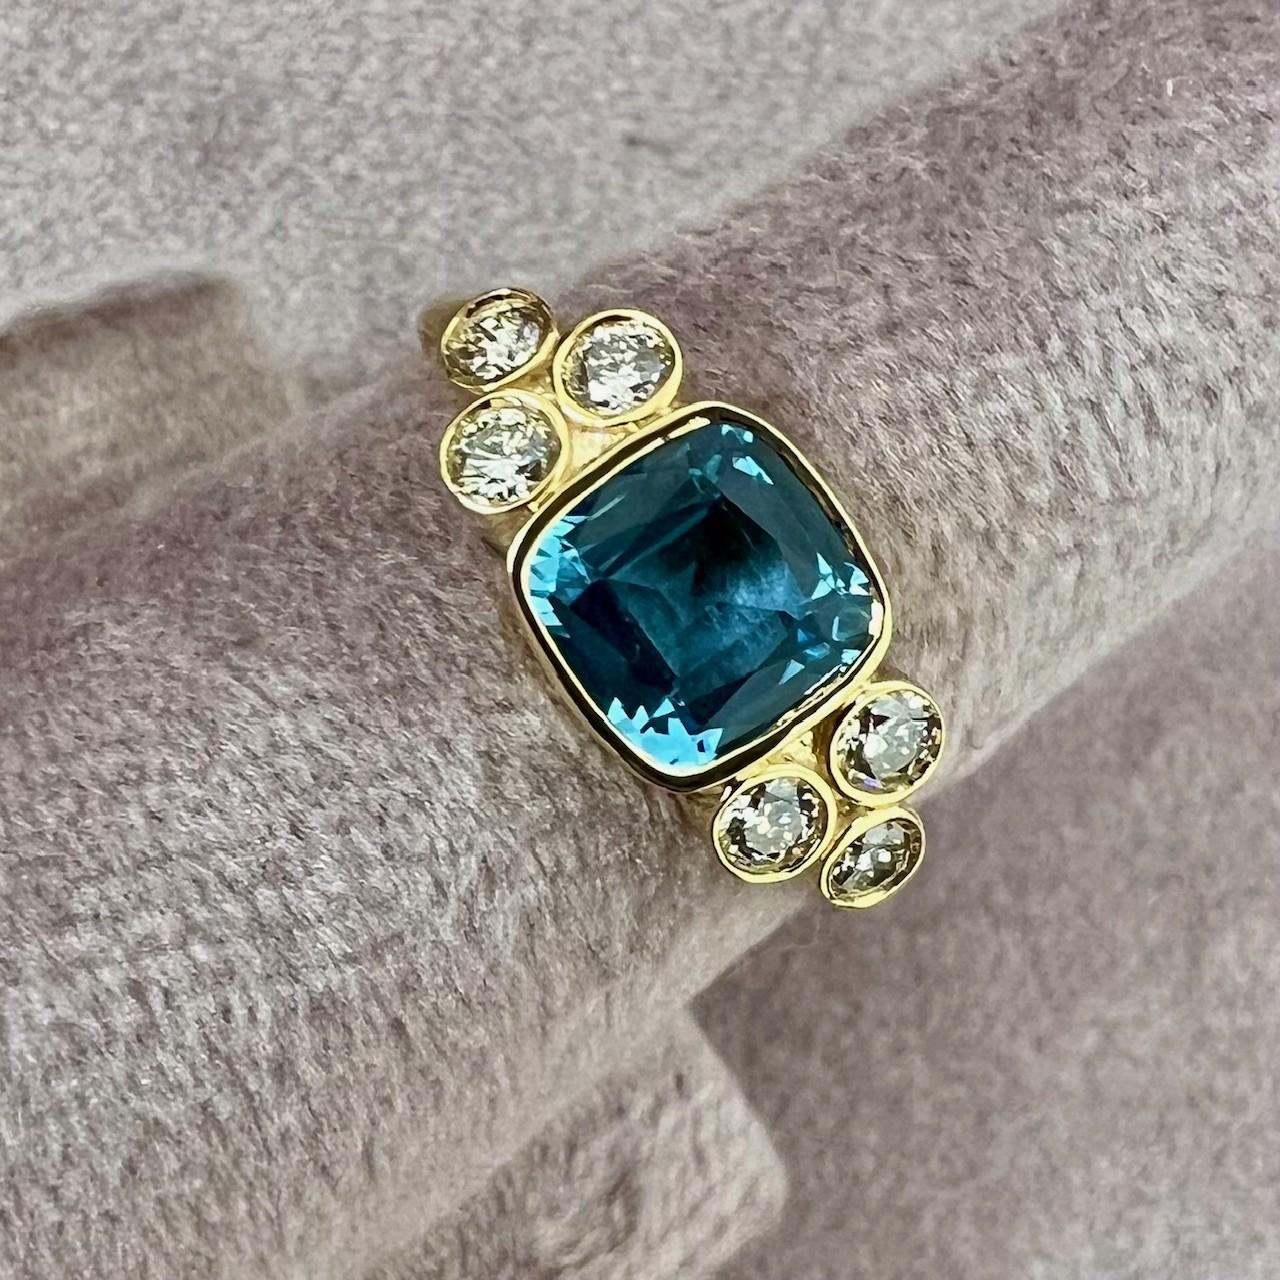 Created in 18 karat yellow gold
Blue Topaz 1.70 carats approx.
Diamonds 0.35 carat approx.
Ring size US 7, can be sized
Limited edition


About the Designers ~ Dharmesh & Namrata

Drawing inspiration from little things, Dharmesh & Namrata Kothari